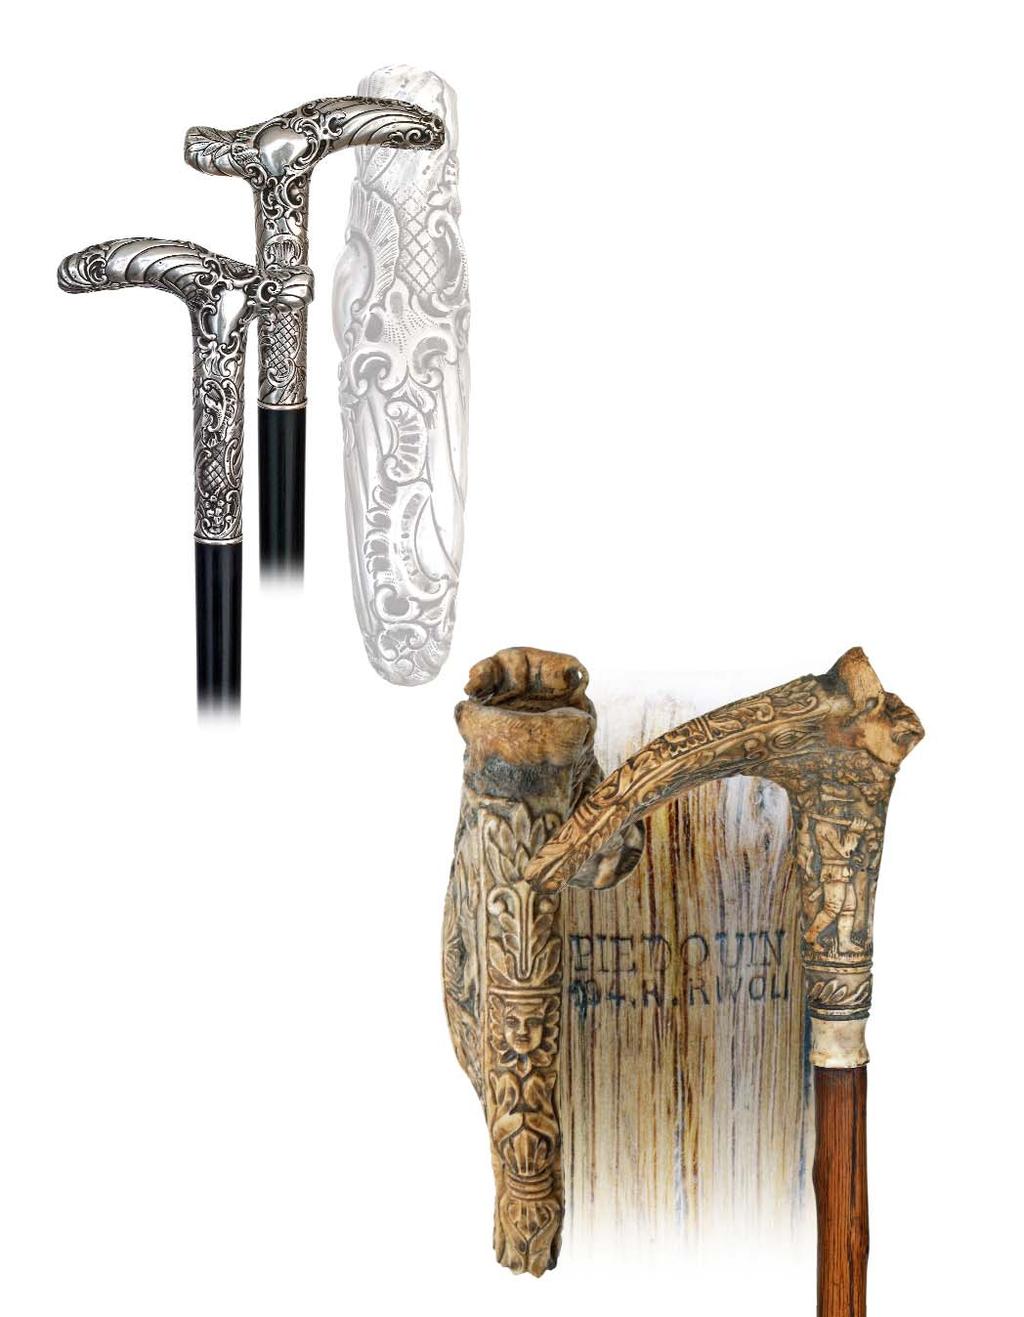 125. Viennese Dress Cane Late 19th Century-Well balanced Derby silver handle with long stem hand chased and engraved in the rich Baroque taste on a naturally deep black ebony shaft with a horn